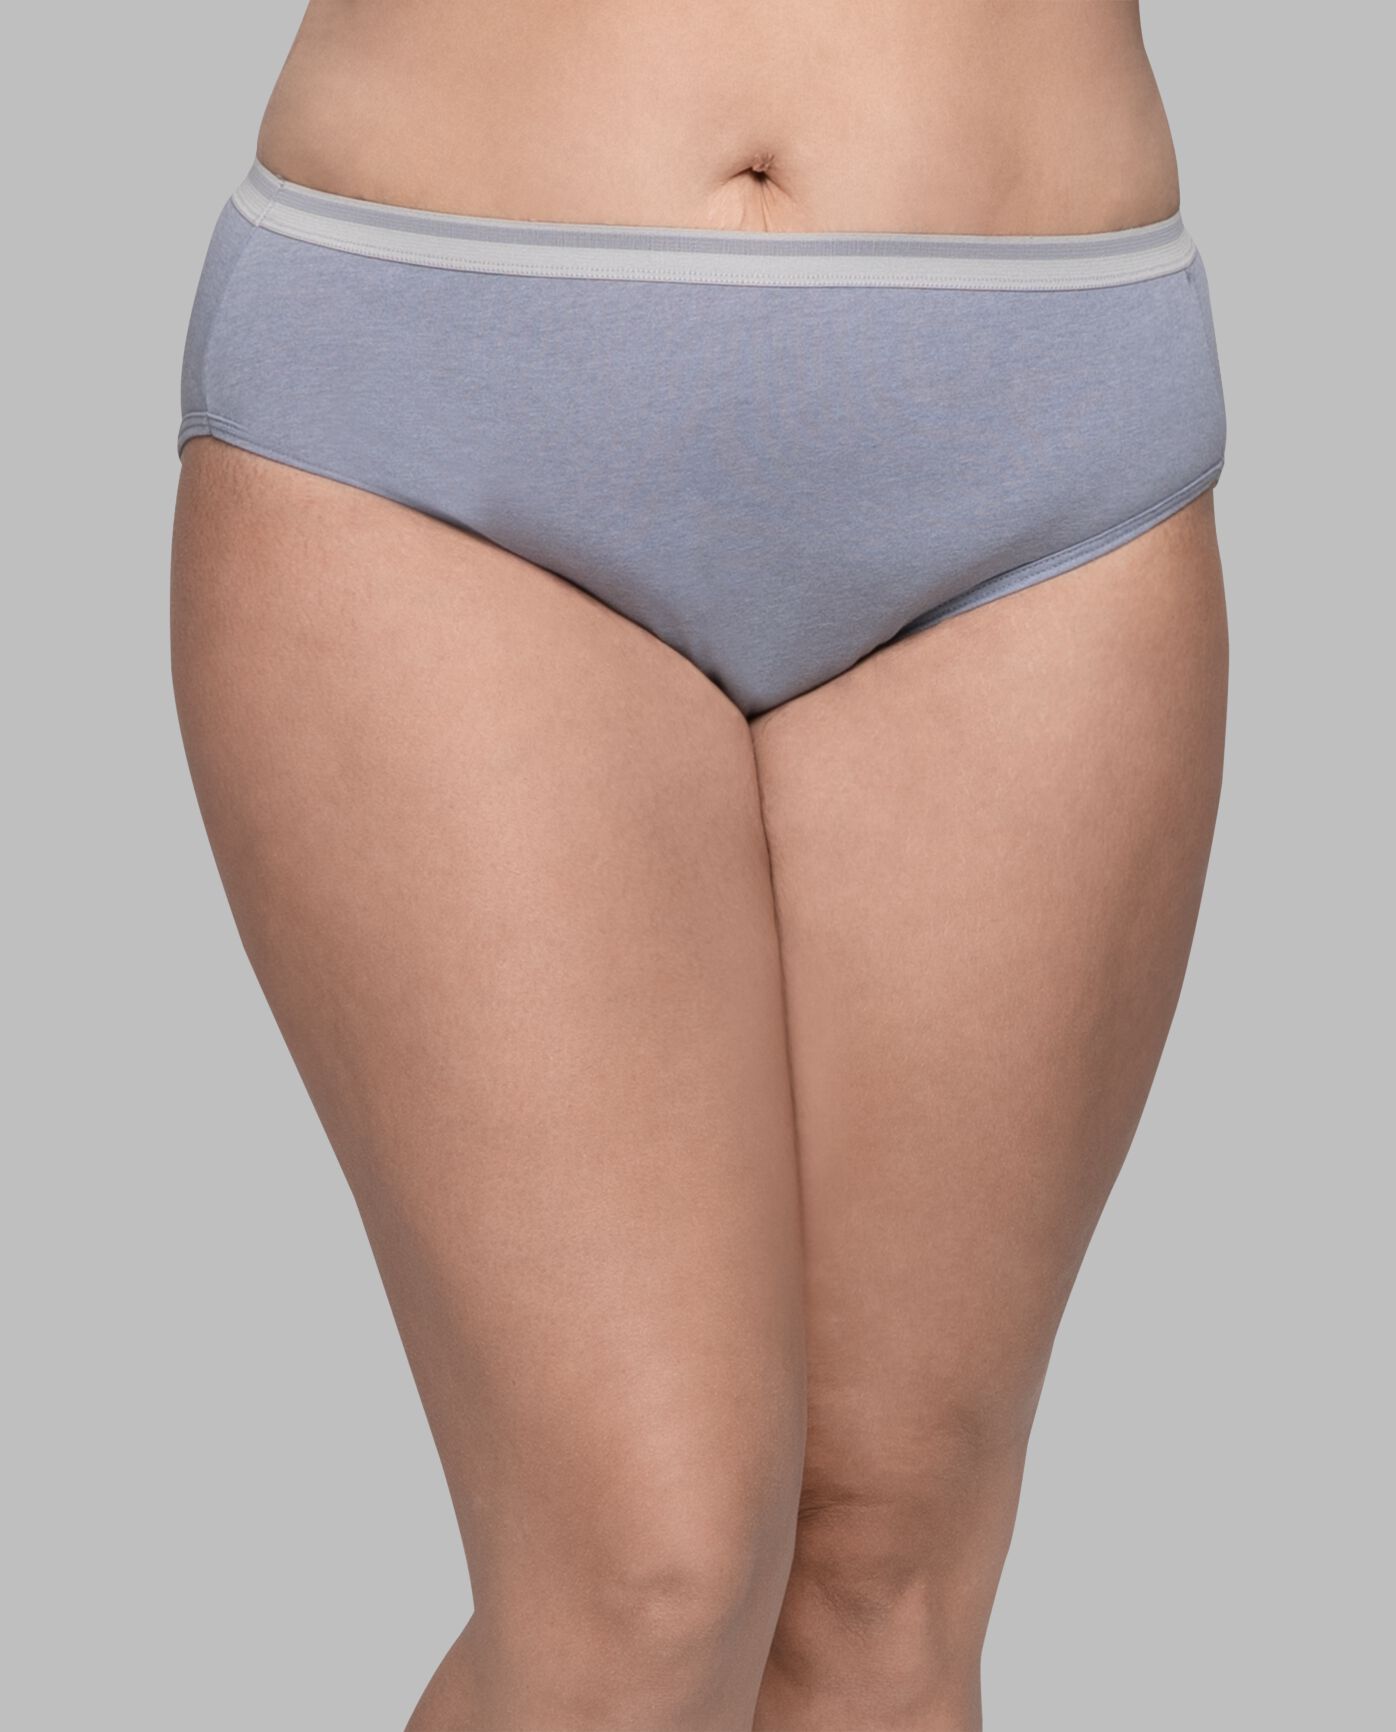 Fruit of the Loom Mesh Plus Size Panties for Women for sale